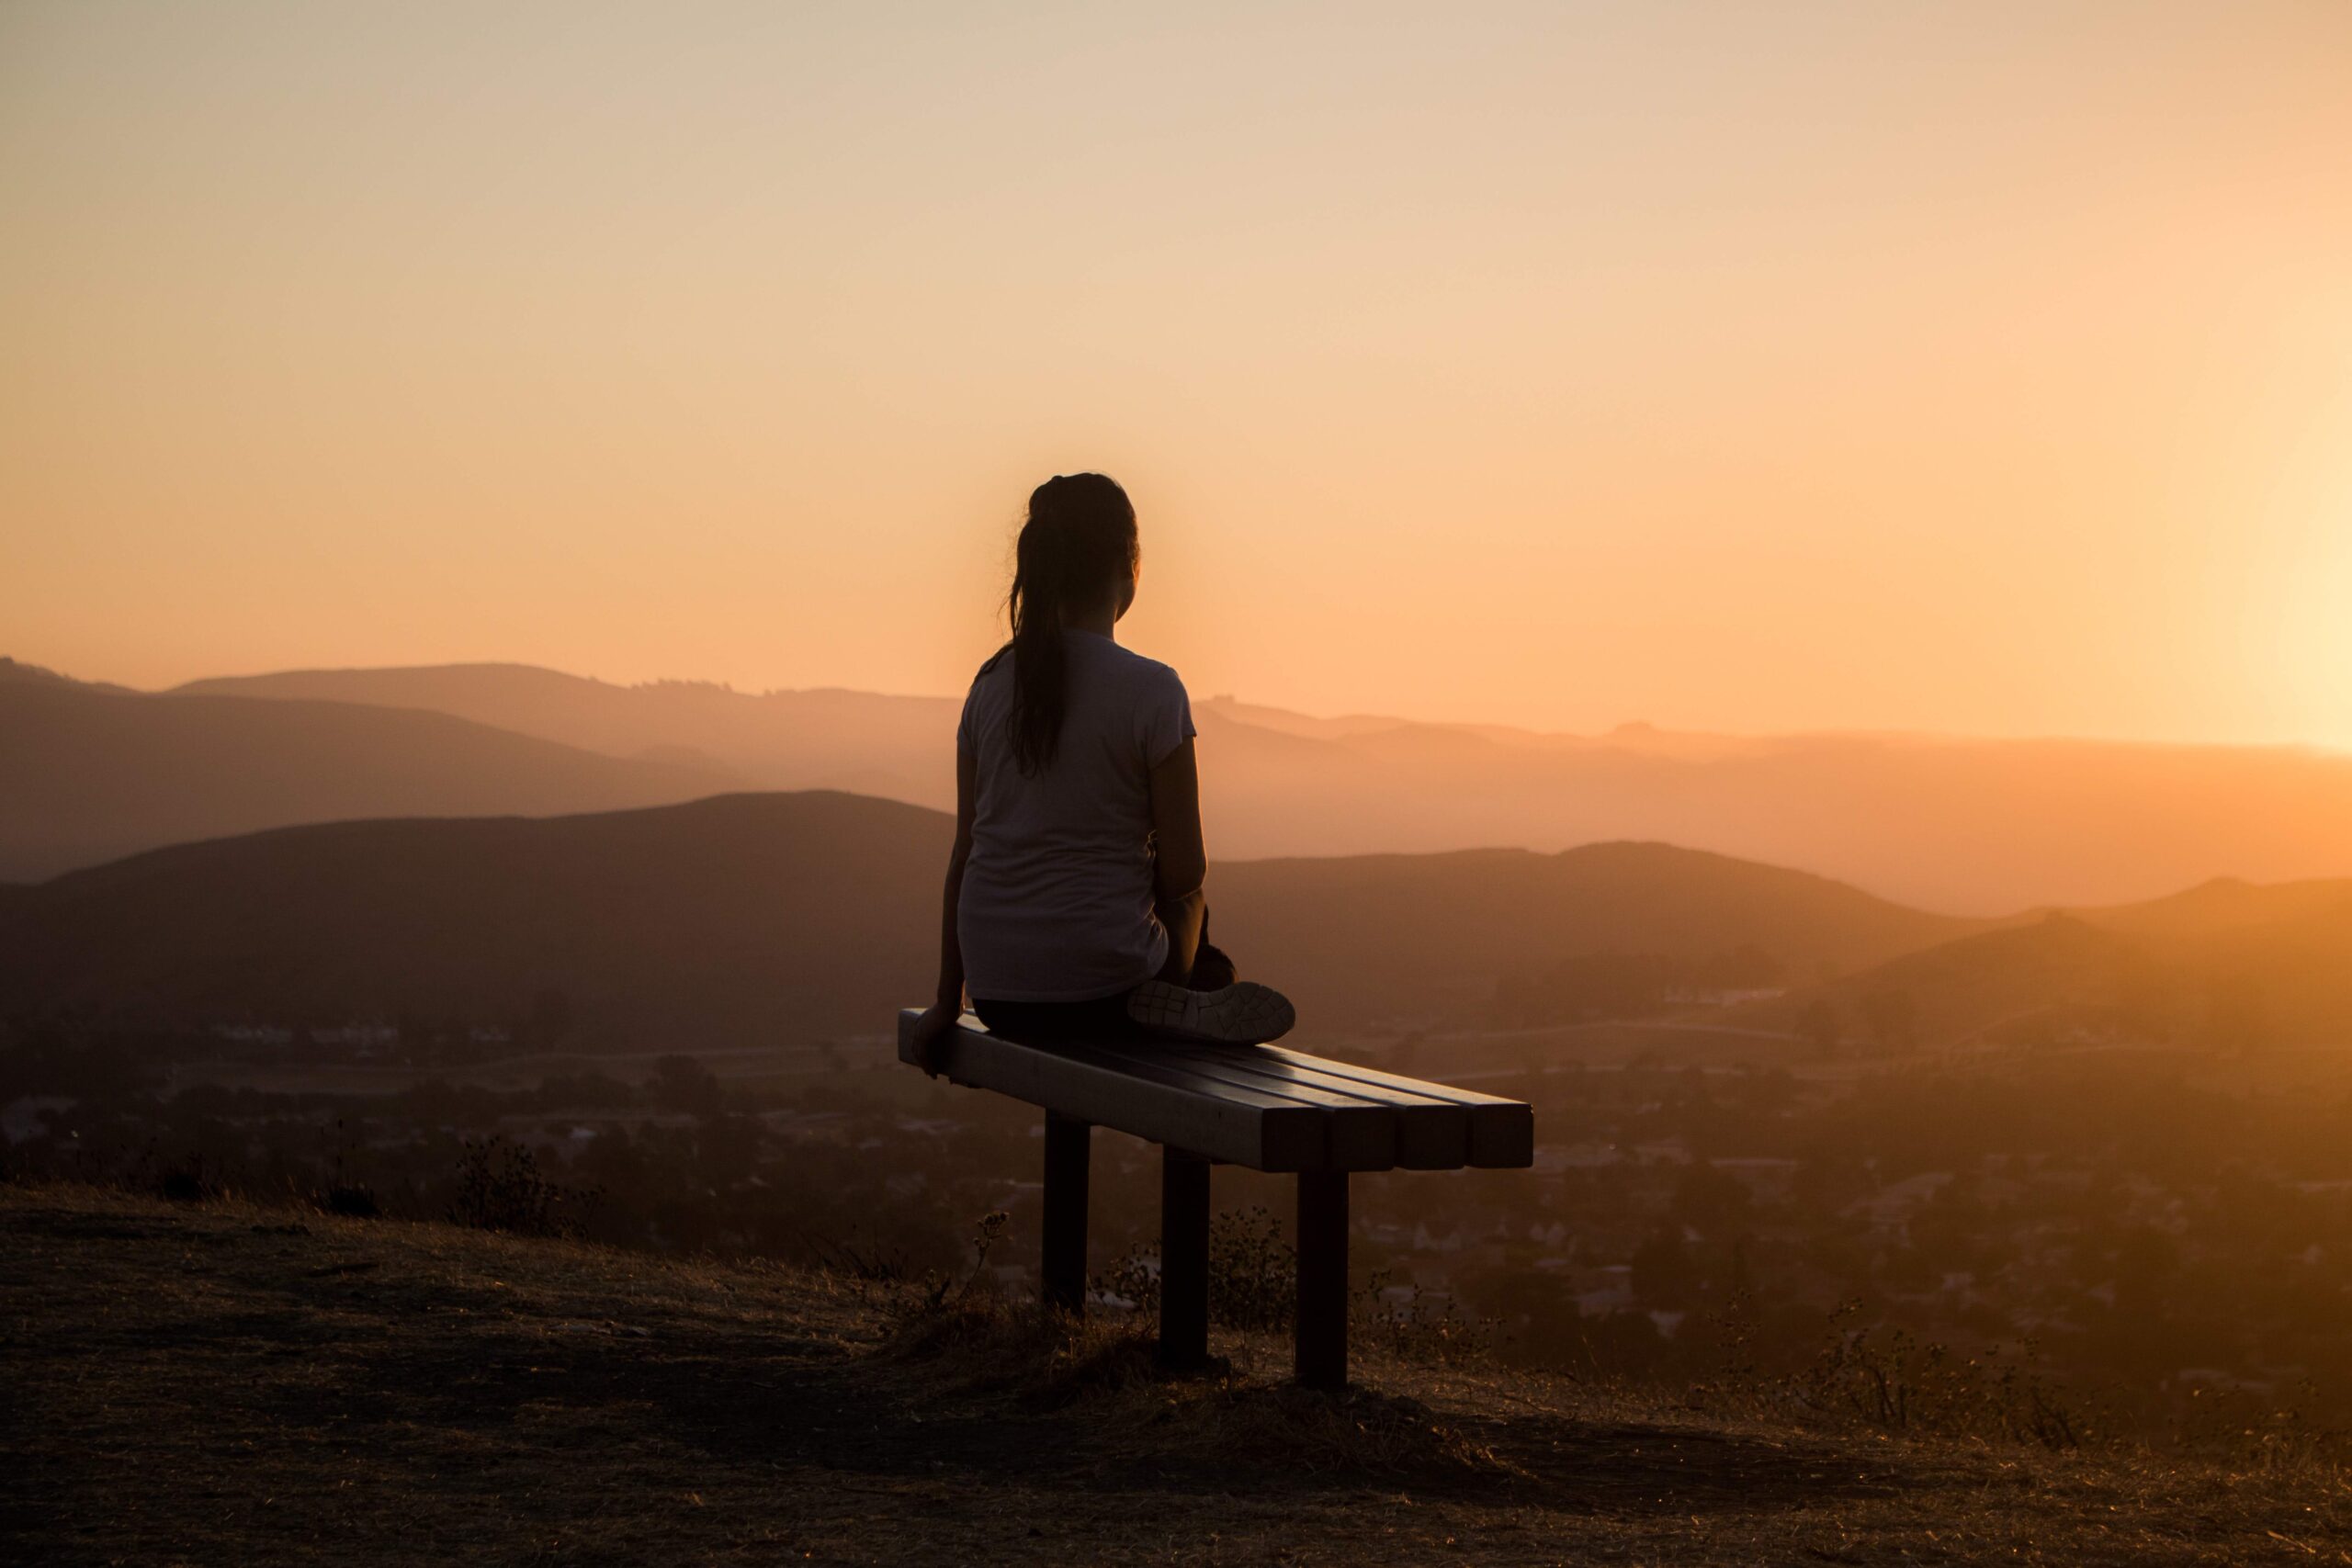 a girl sitting alone on a wooden bench enjoying sunset view.